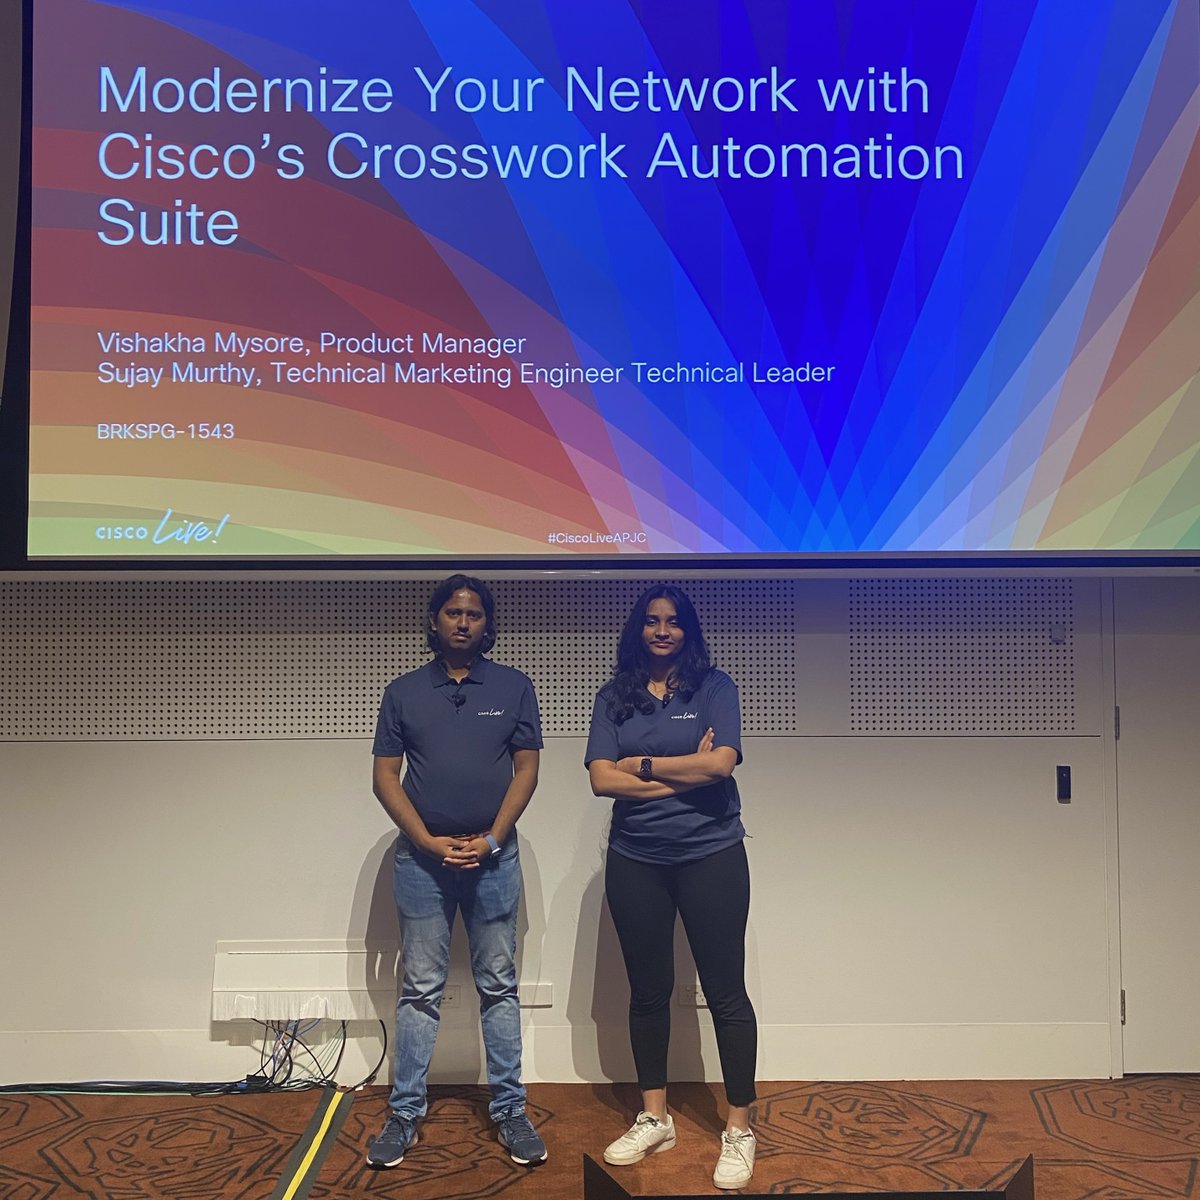 'When the changing nature of network services keeps you on your toes—Crosswork Automation Suite will help you leap through the changes.”
 
- Engineering Product Manager Vishakha Mysore Vedavyas at #CiscoLiveAPJC
 
Learn more ⤵️ 
cs.co/6013RJN5H
  
#CiscoServiceProvider